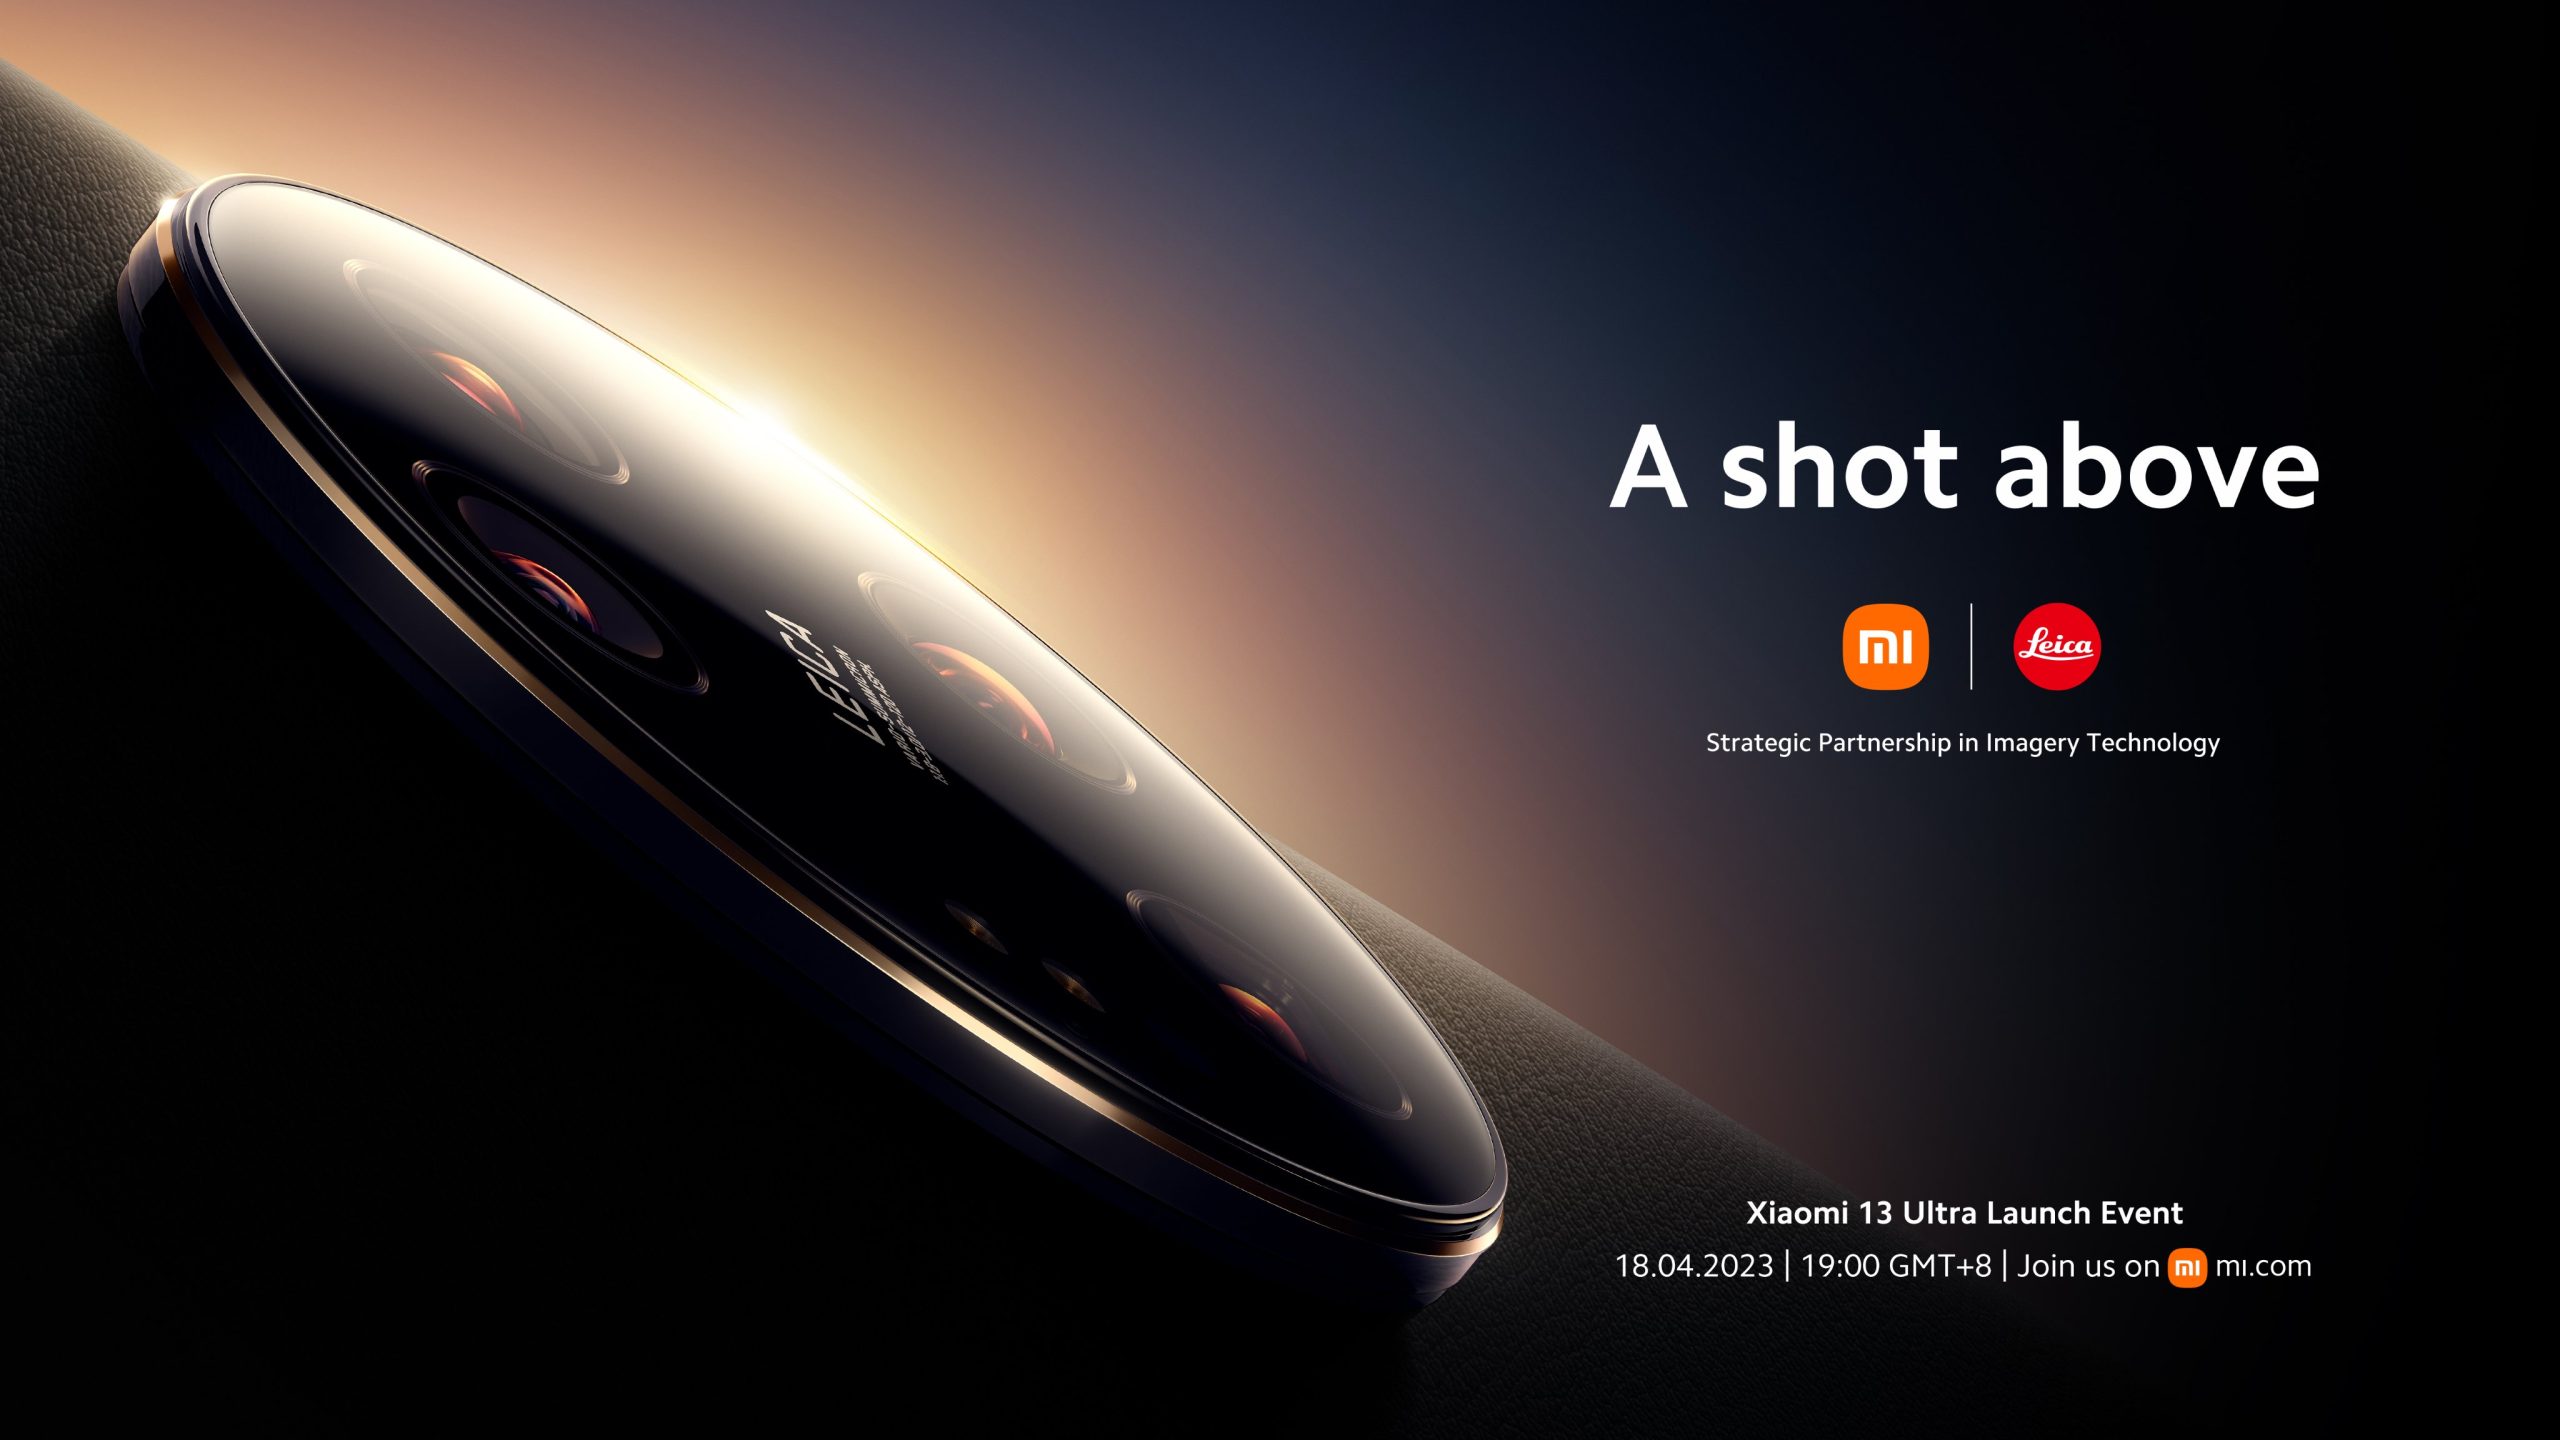 Xiaomi Band 8 Active leaks with images, specs, and pricing